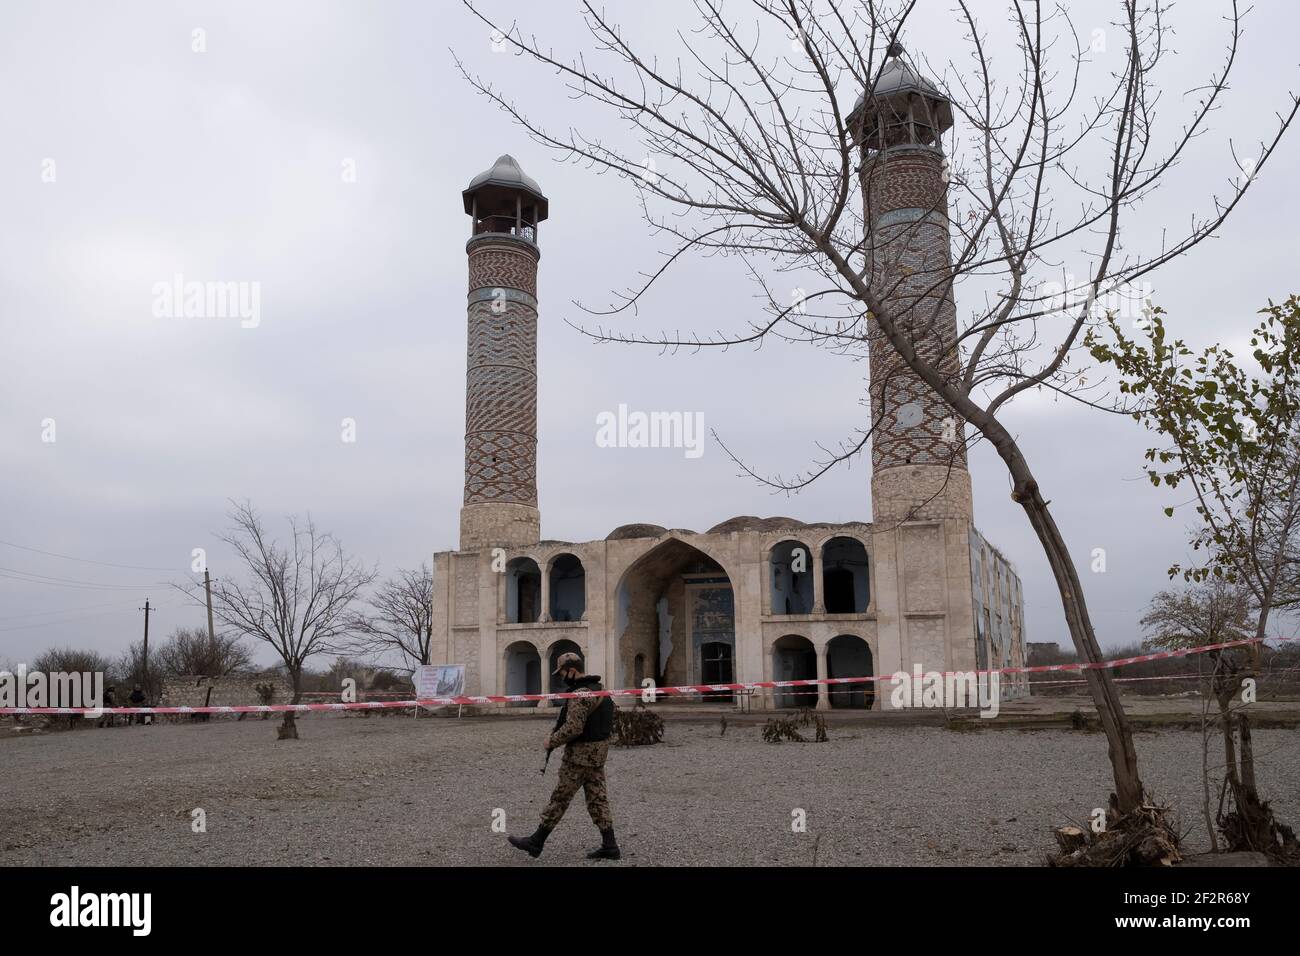 AGDAM, AZERBAIJAN - DECEMBER 14: An Azerbaijani soldier walks in front of the19th century Juma Mosque the only building left standing in the town of Agdam which was destroyed during the First Nagorno-Karabakh War by Armenian forces on December 14, 2020 in Agdam, Azerbaijan. The town and its surrounding district were returned to Azerbaijani control as part of an agreement that ended the 2020 Nagorno-Karabakh War. Stock Photo